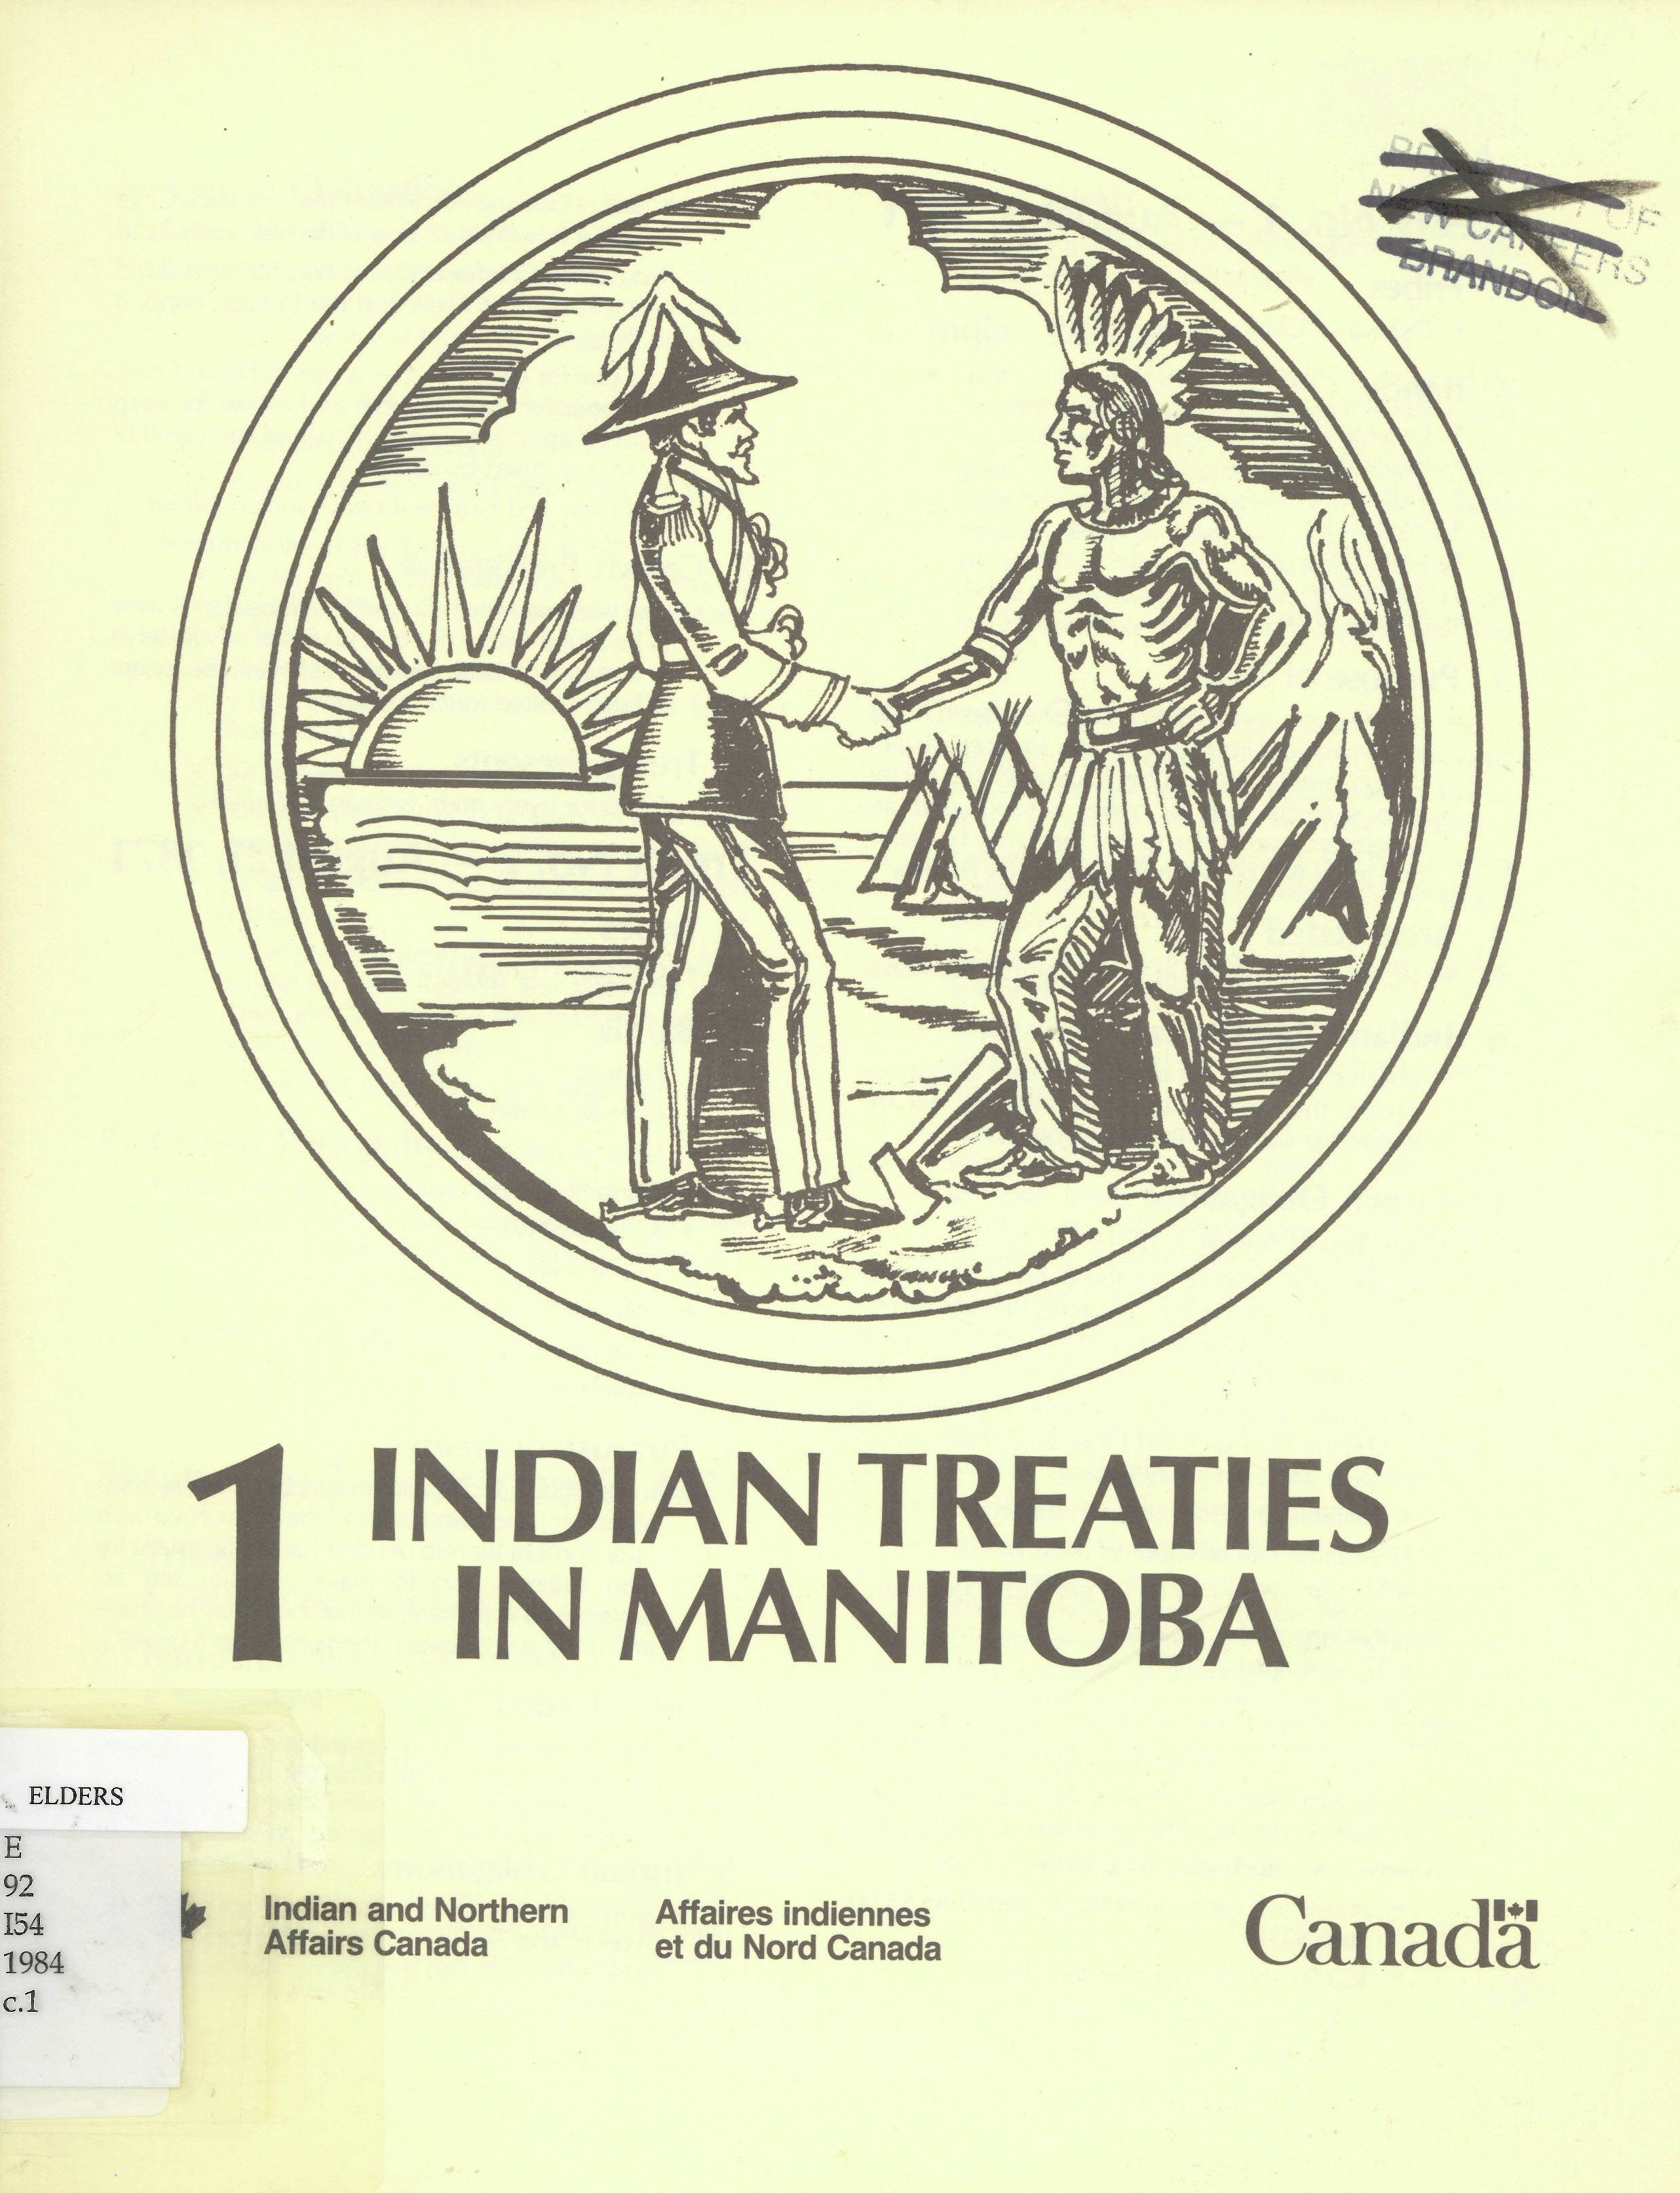 Indian treaties in Manitoba